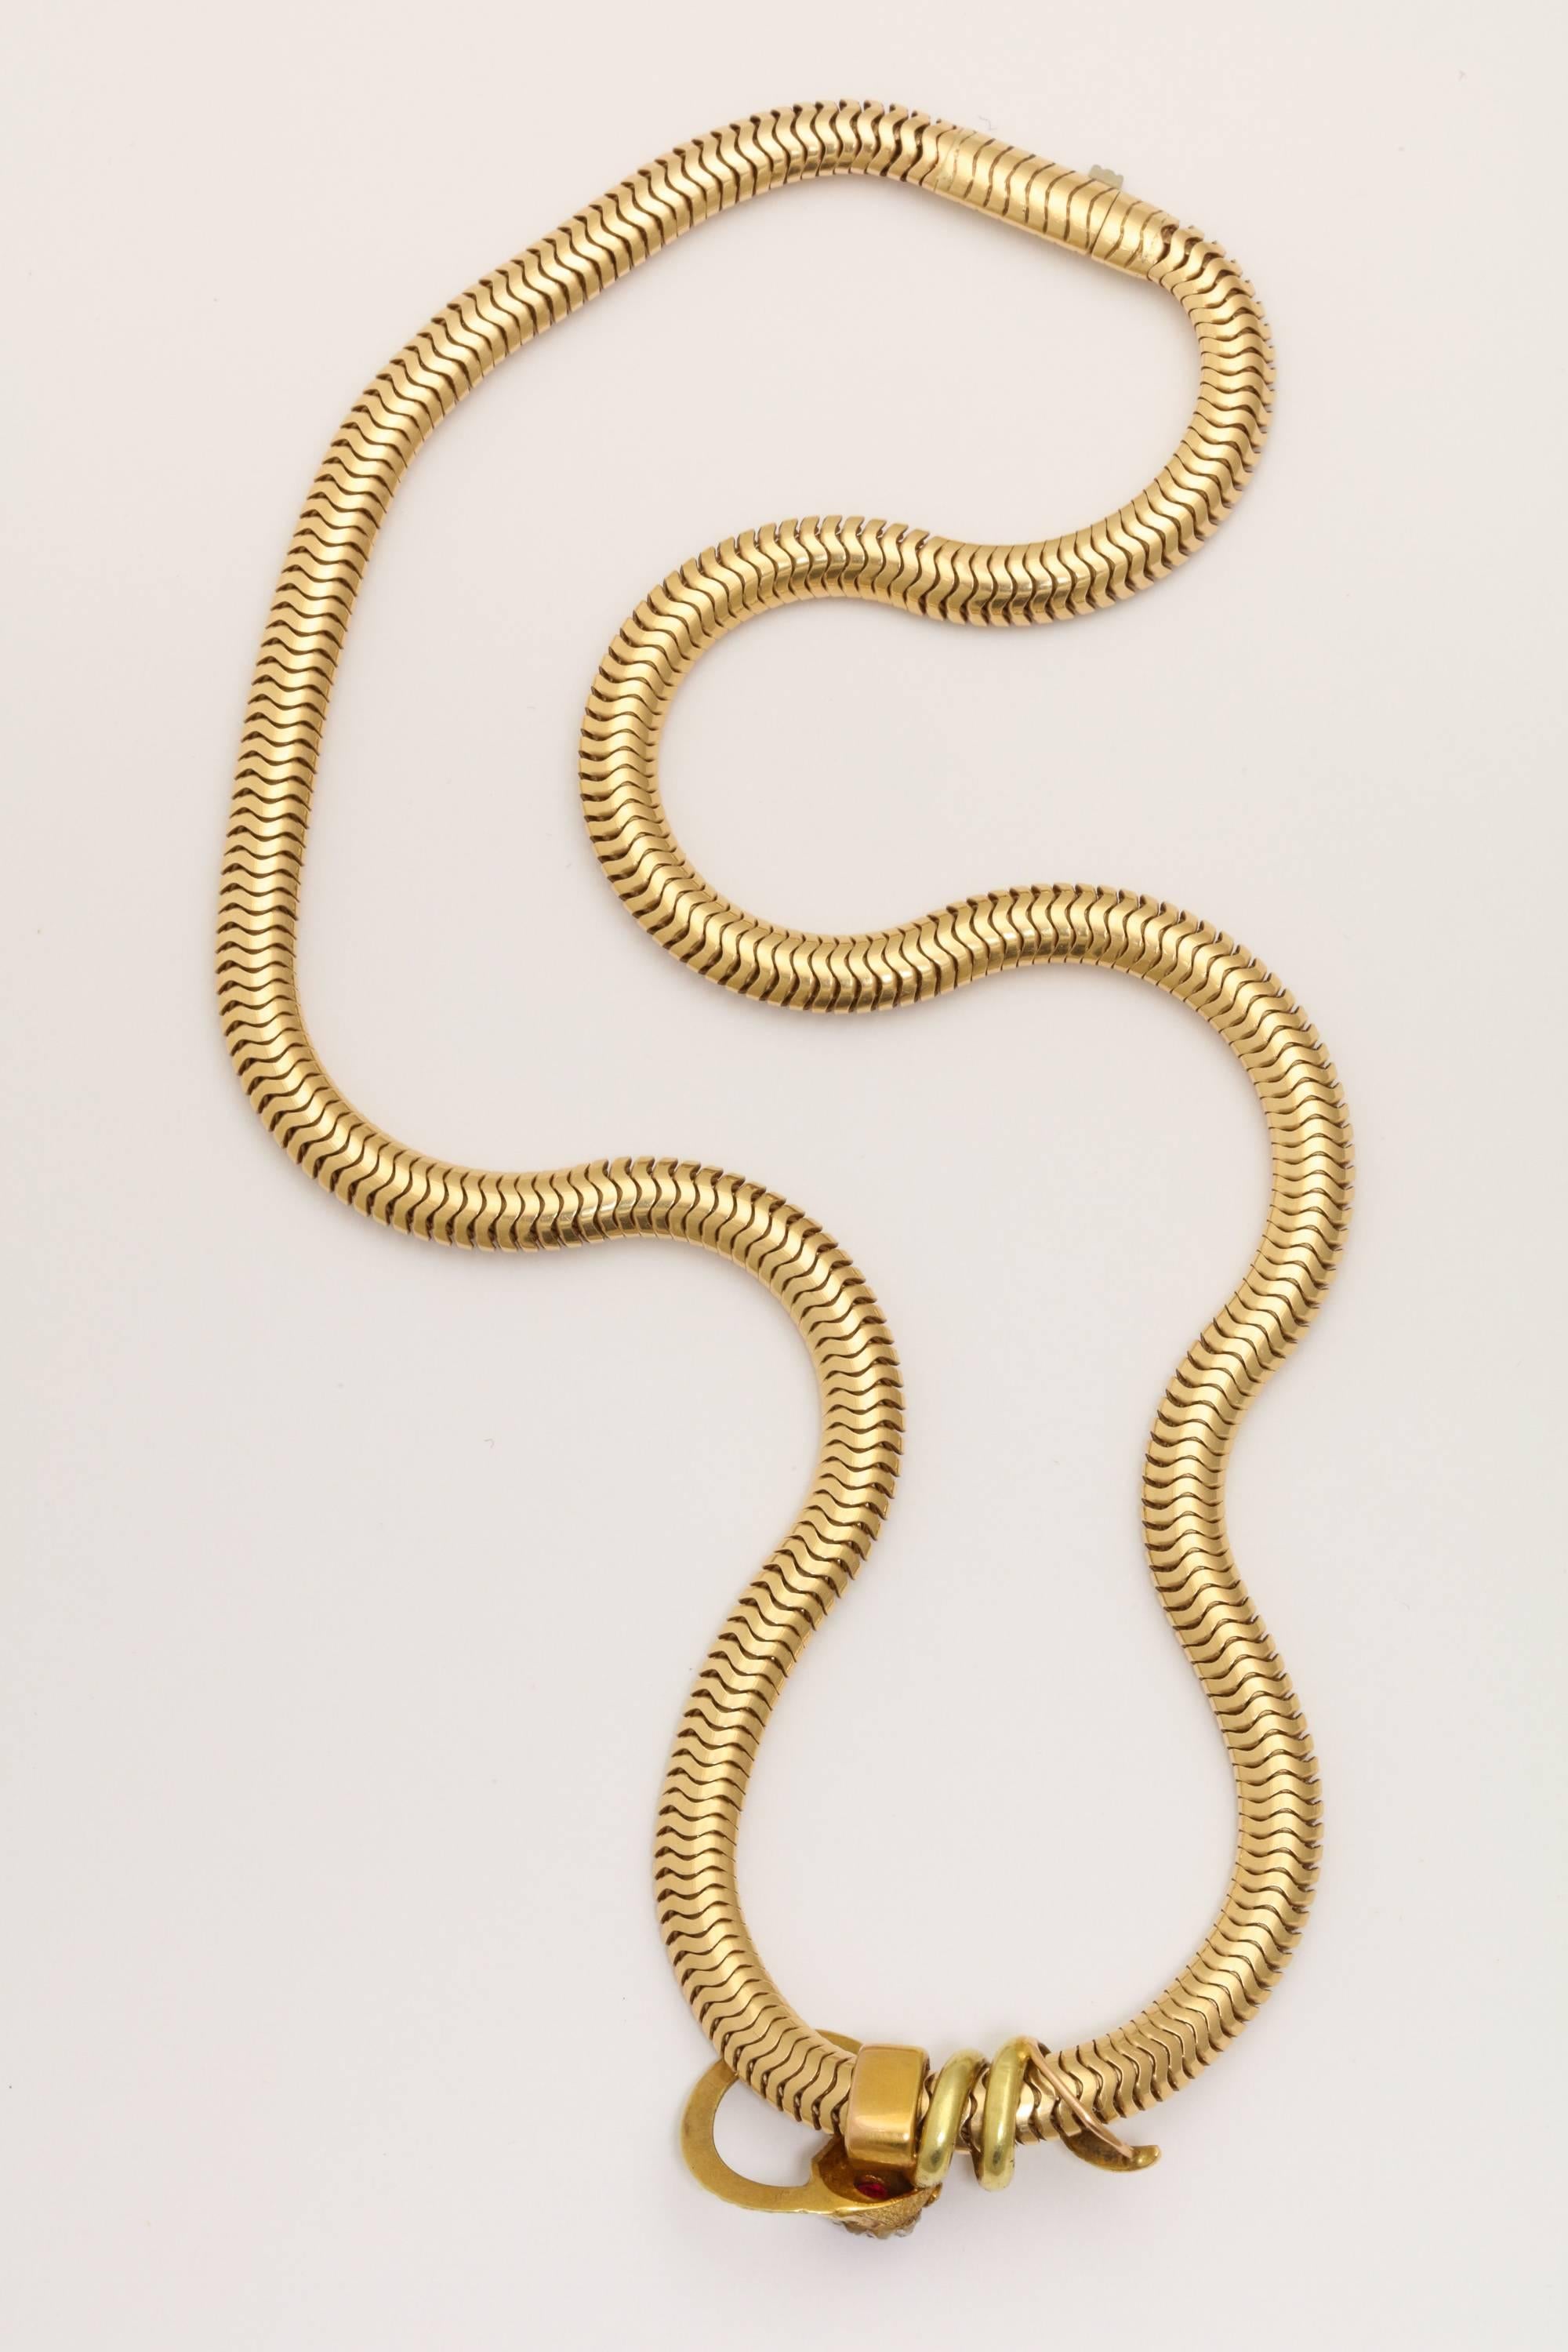 A great example of a classic 1930s 18-karat gold snake coiled around a woven 14-karat gold snake chain. The headb is encrusted with a ruby crest and surrounded by mine diamonds with ruby eyes and pearl.